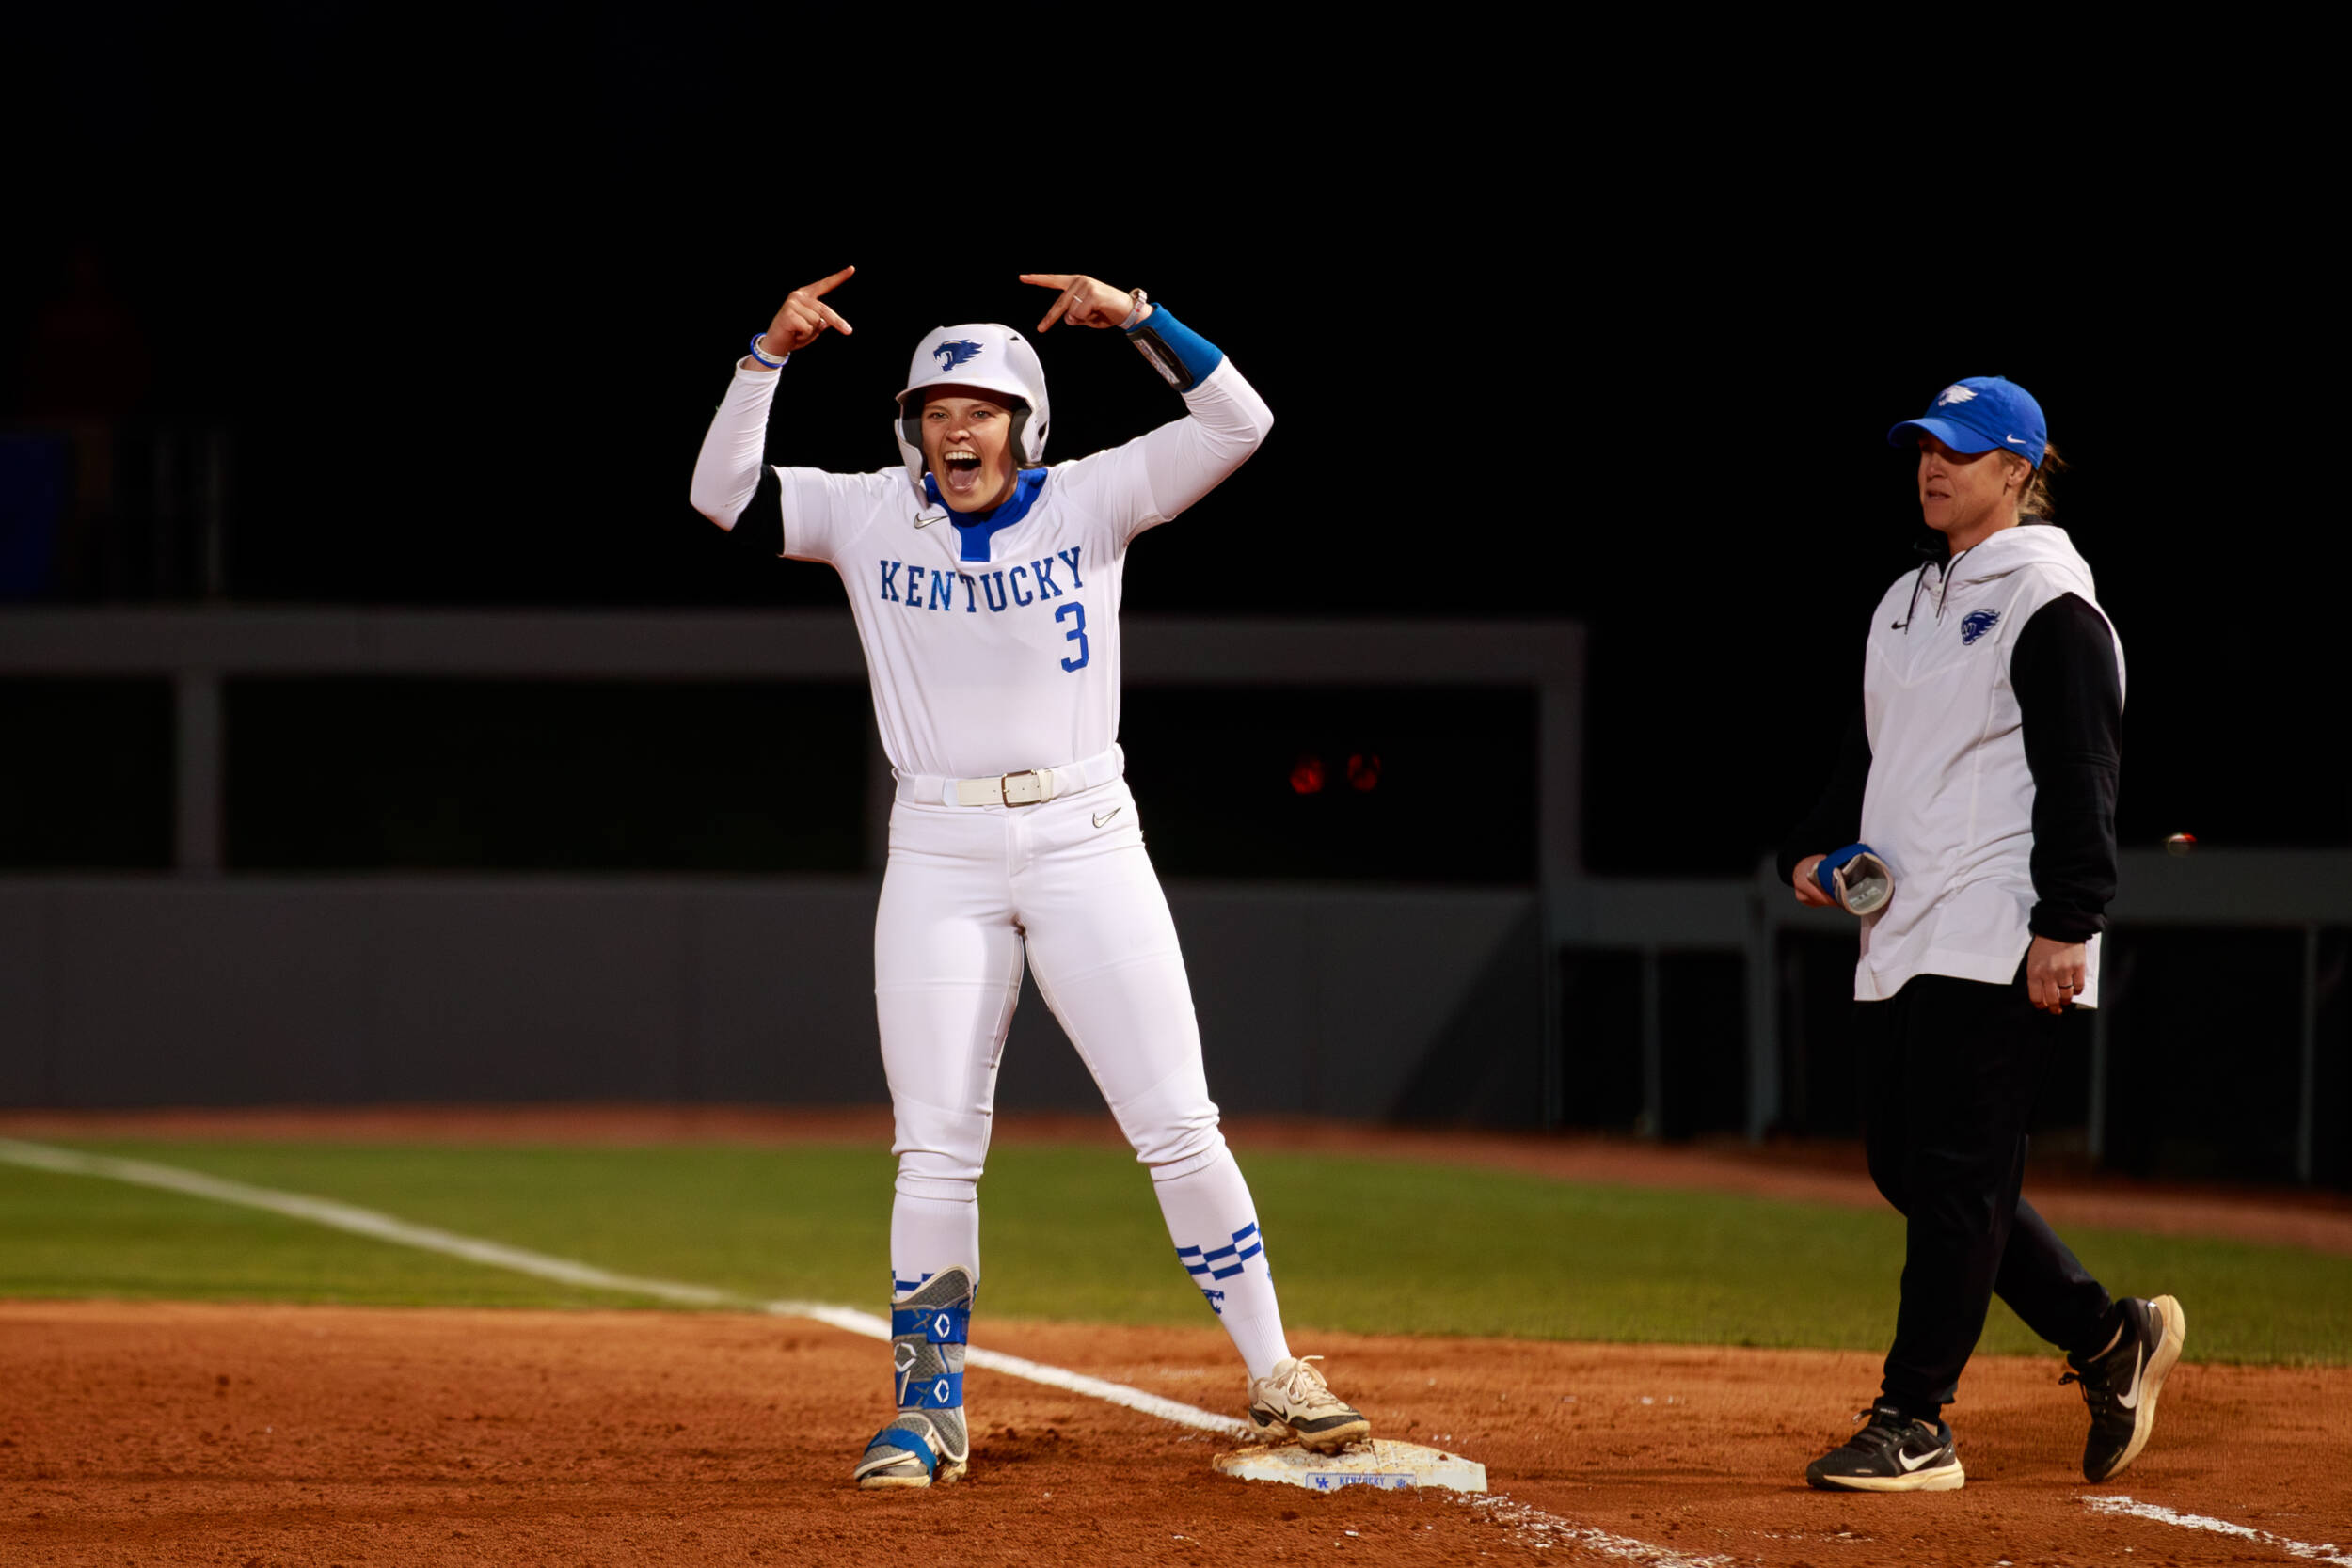 Schoonover’s Heroic 181-Pitch Night Gives Kentucky 6-3 Win